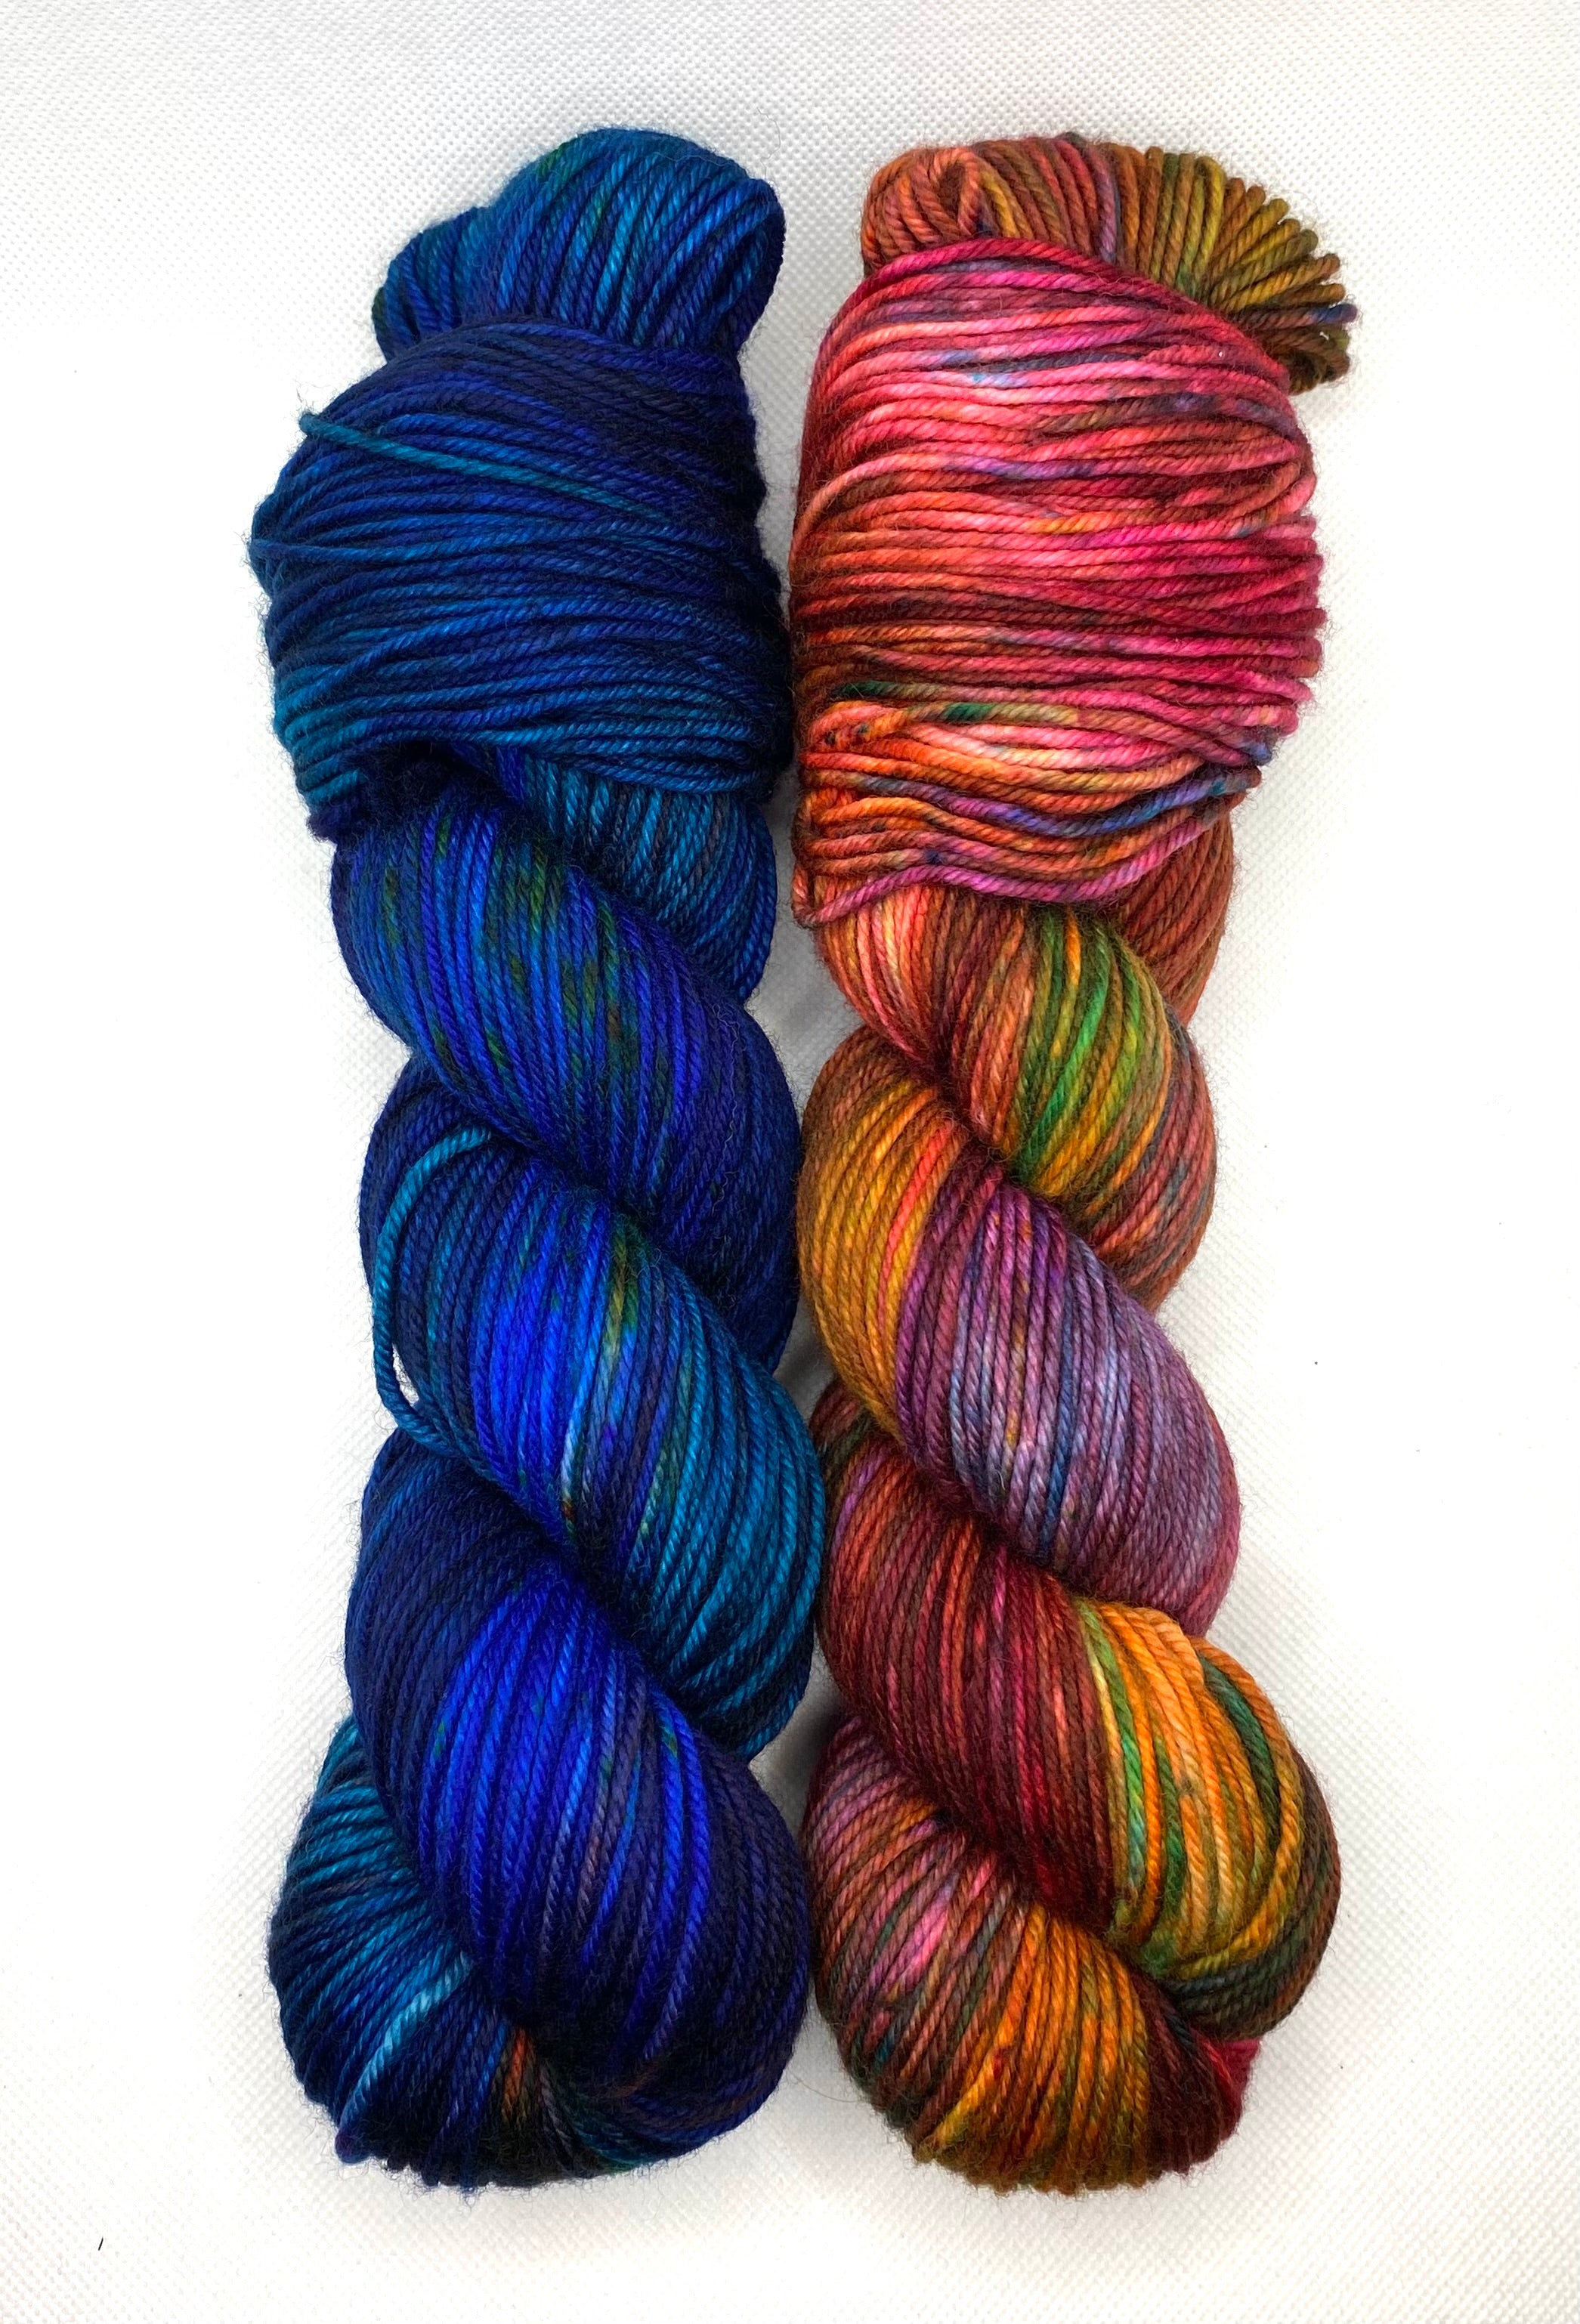 2 Skein Matching Set: DK, Deep Blue and Maroon Variegated Hand Dyed Yarn